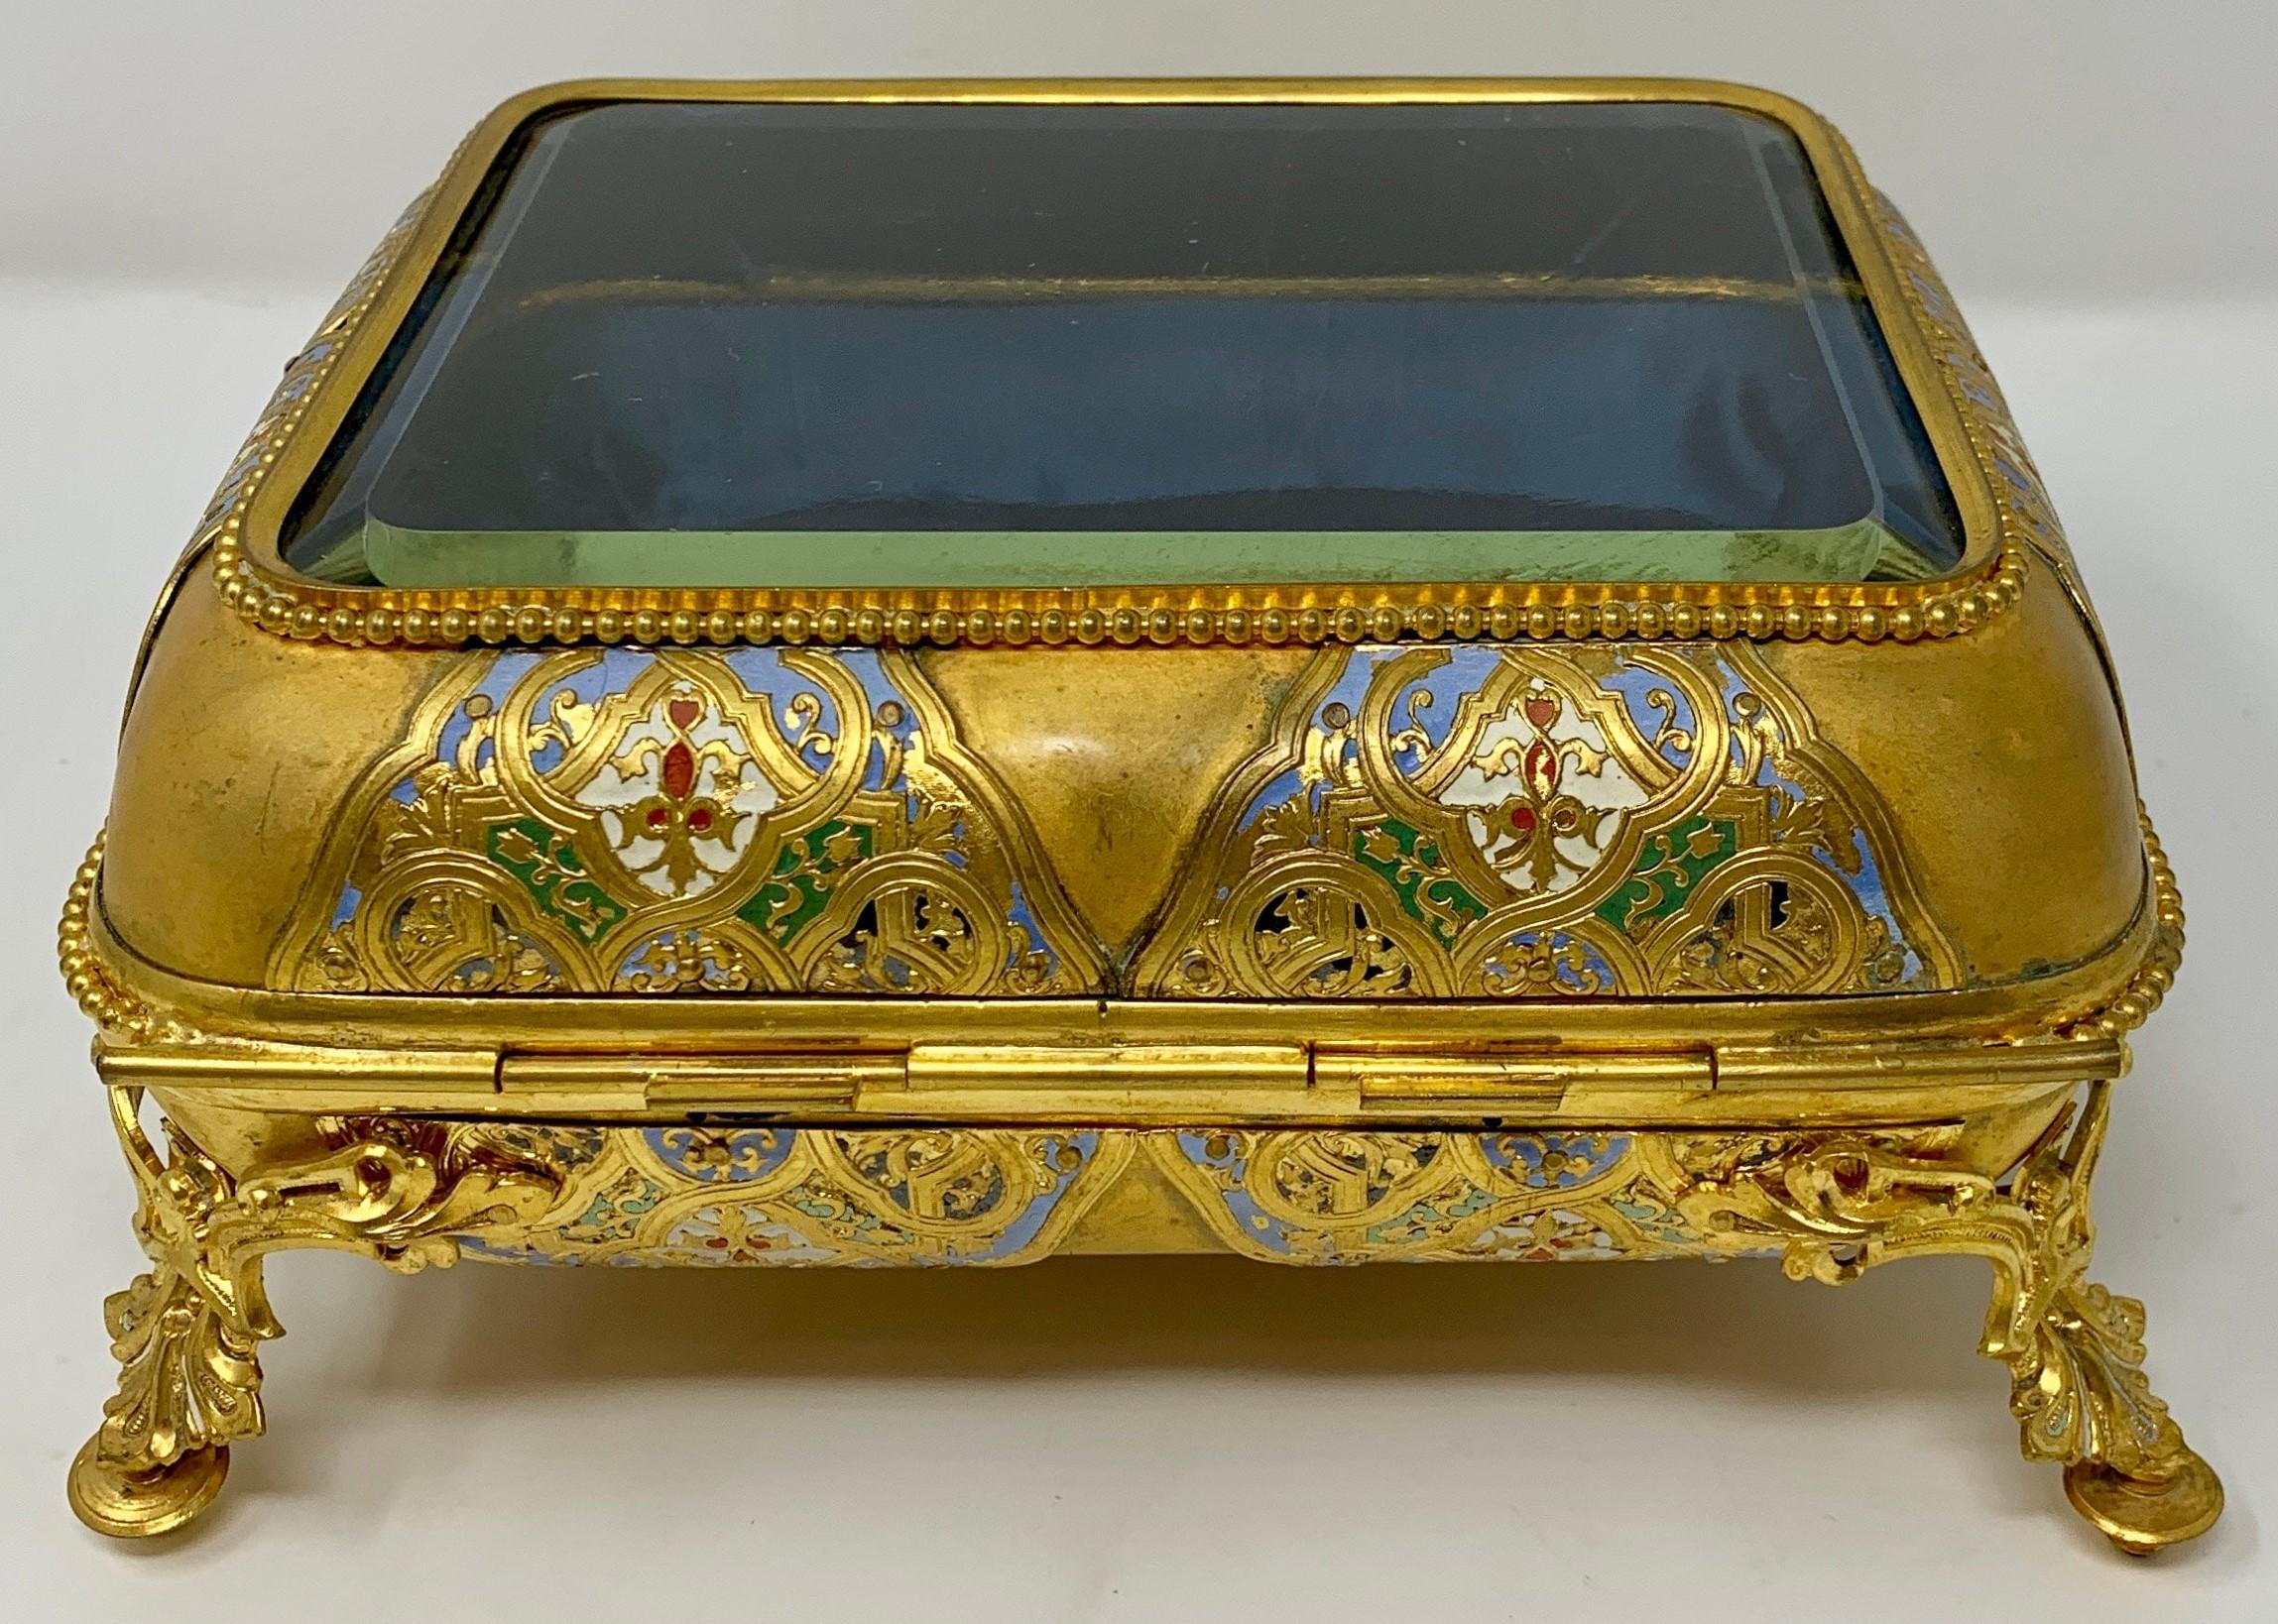 19th Century Antique French Napoleon III Ormolu and Cloisonné Jewel Box For Sale